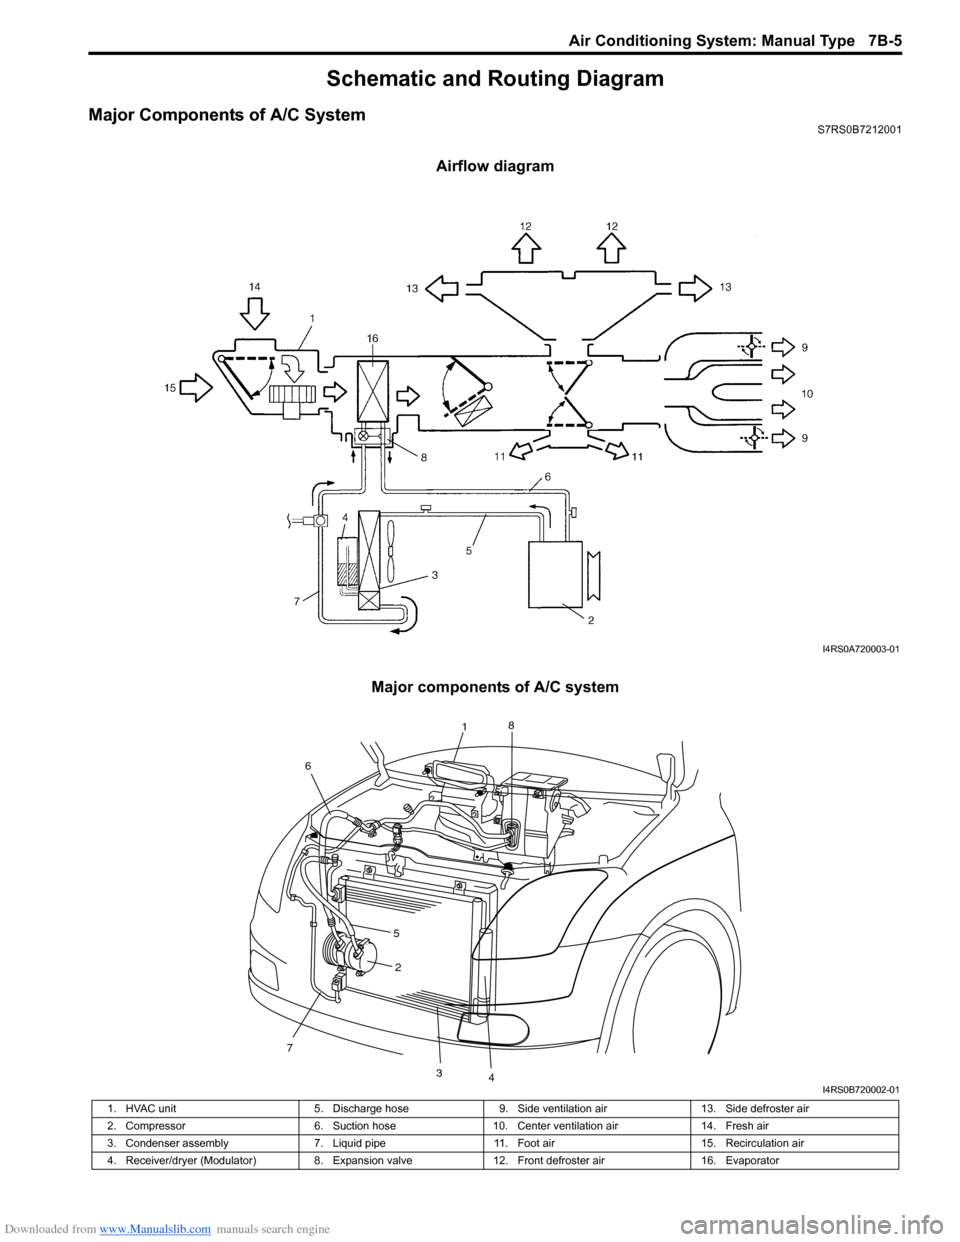 SUZUKI SWIFT 2008 2.G Service Workshop Manual Downloaded from www.Manualslib.com manuals search engine Air Conditioning System: Manual Type 7B-5
Schematic and Routing Diagram
Major Components of A/C SystemS7RS0B7212001
Airflow diagram
Major compo